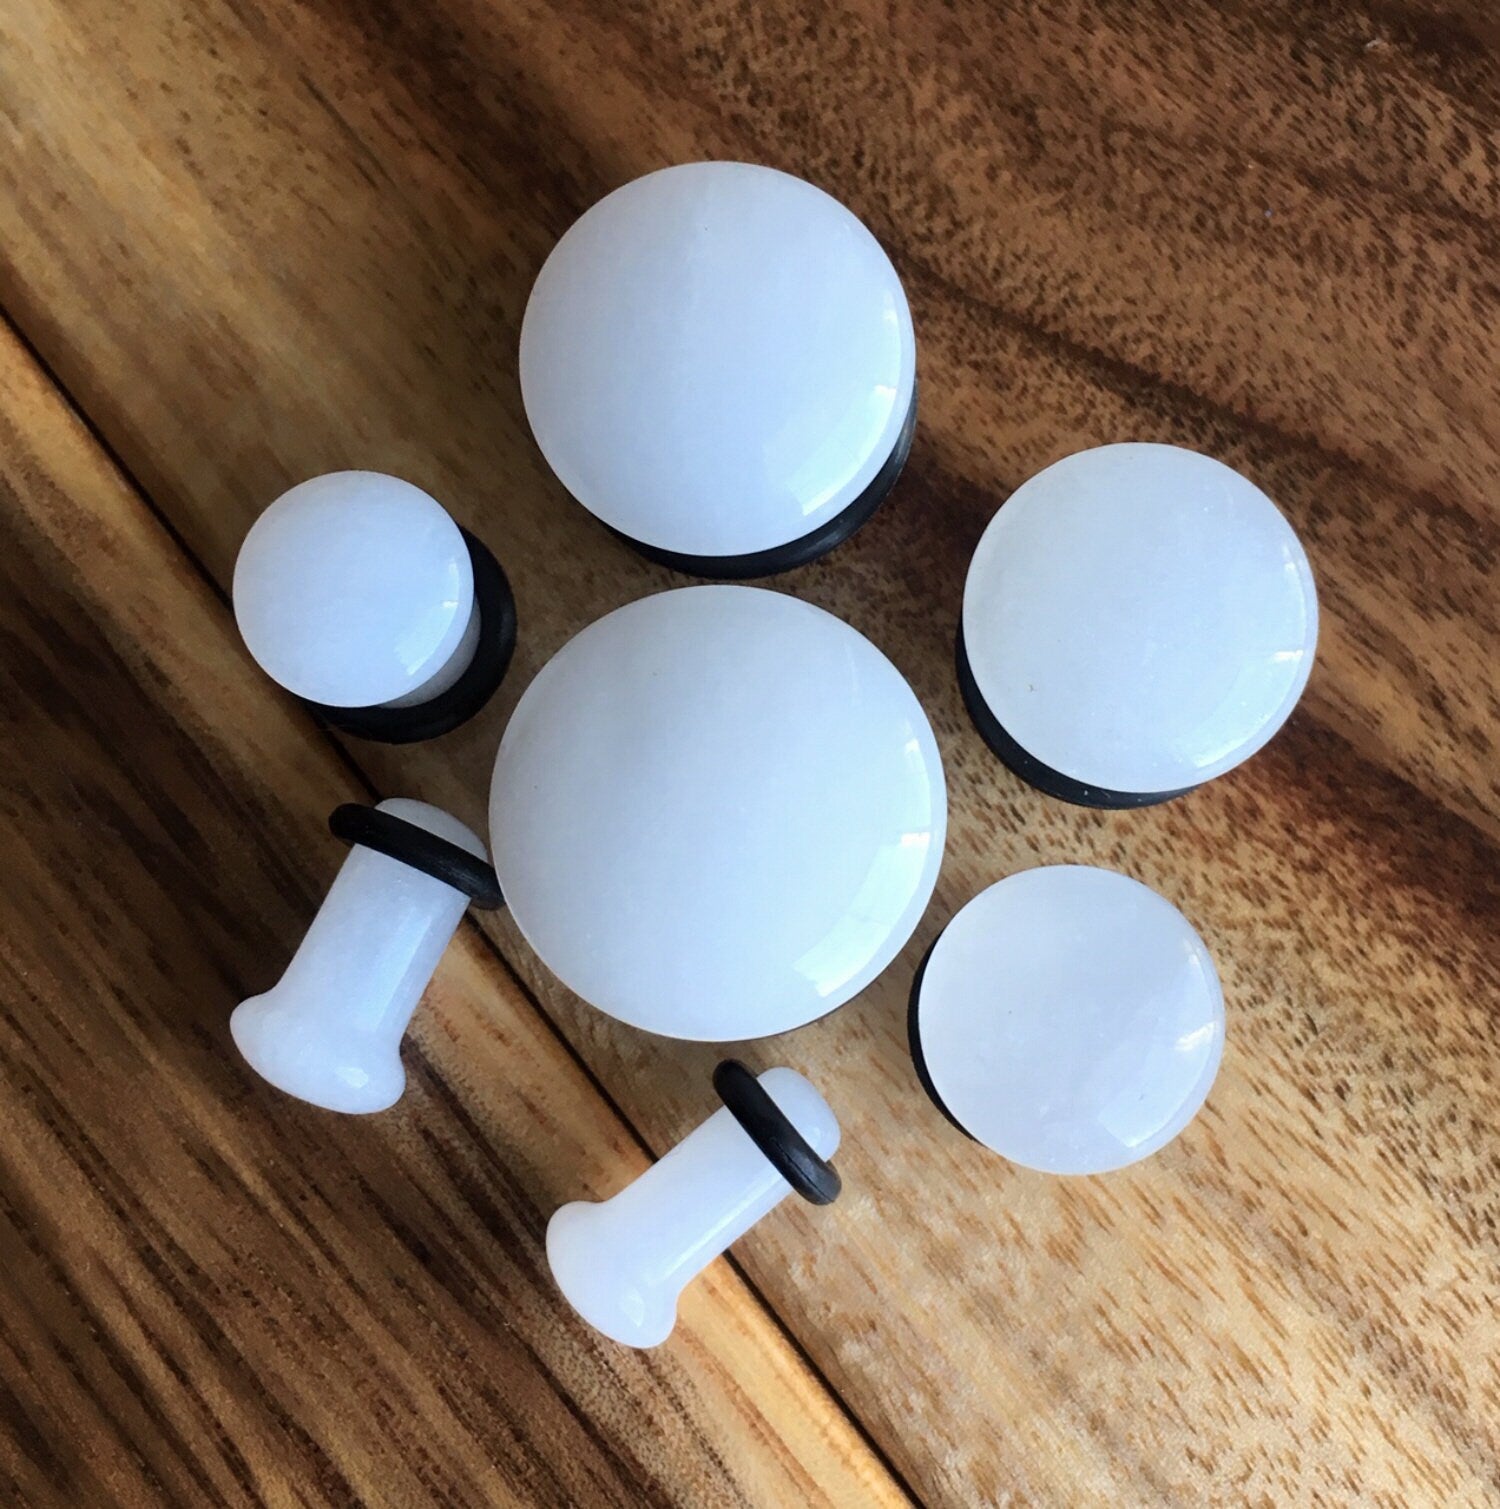 PAIR of Stunning Single Flare White Jade Stone Plugs with O-Rings - Gauges 4g (5mm) up to 5/8" (16mm) available!